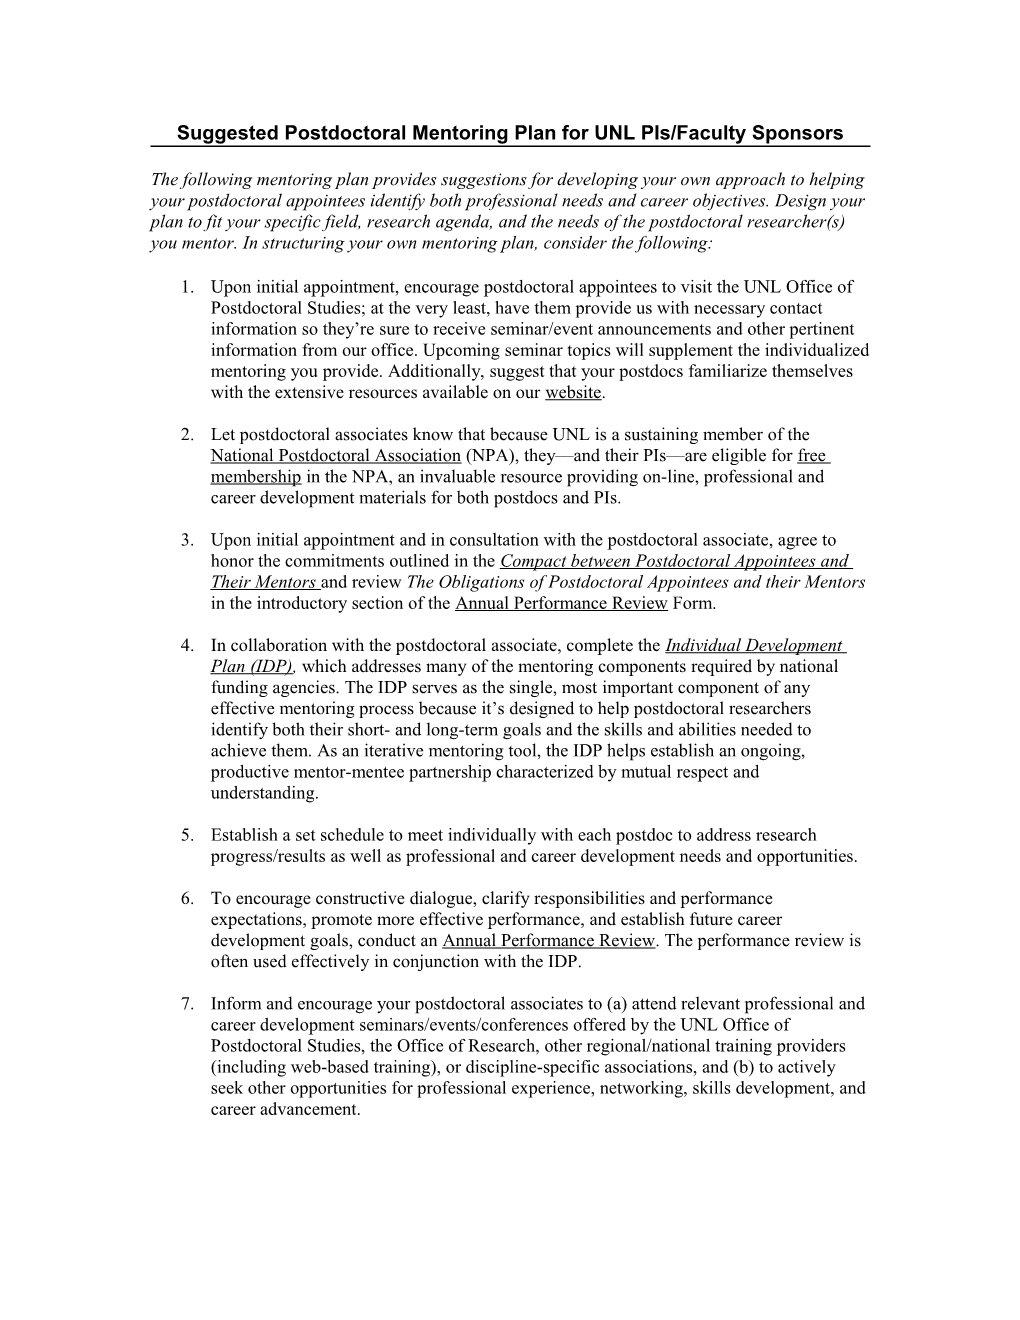 Suggested Postdoctoral Mentoring Plan for UNL Pis/Faculty Sponsors